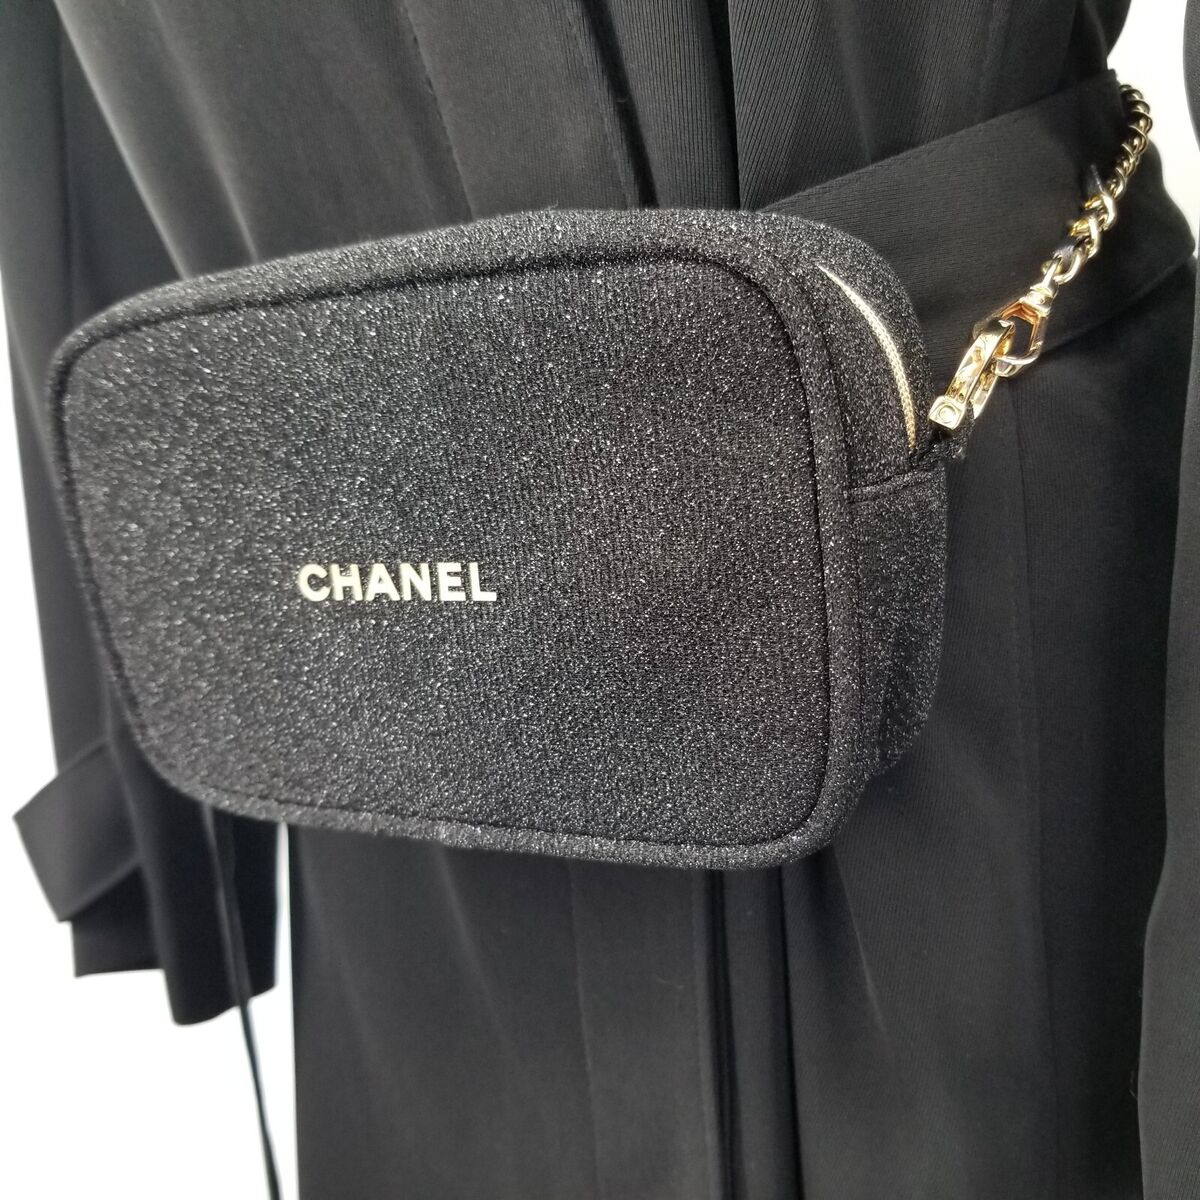 Chanel Womens Limited Edition Bag Black Glitter Gold Convert